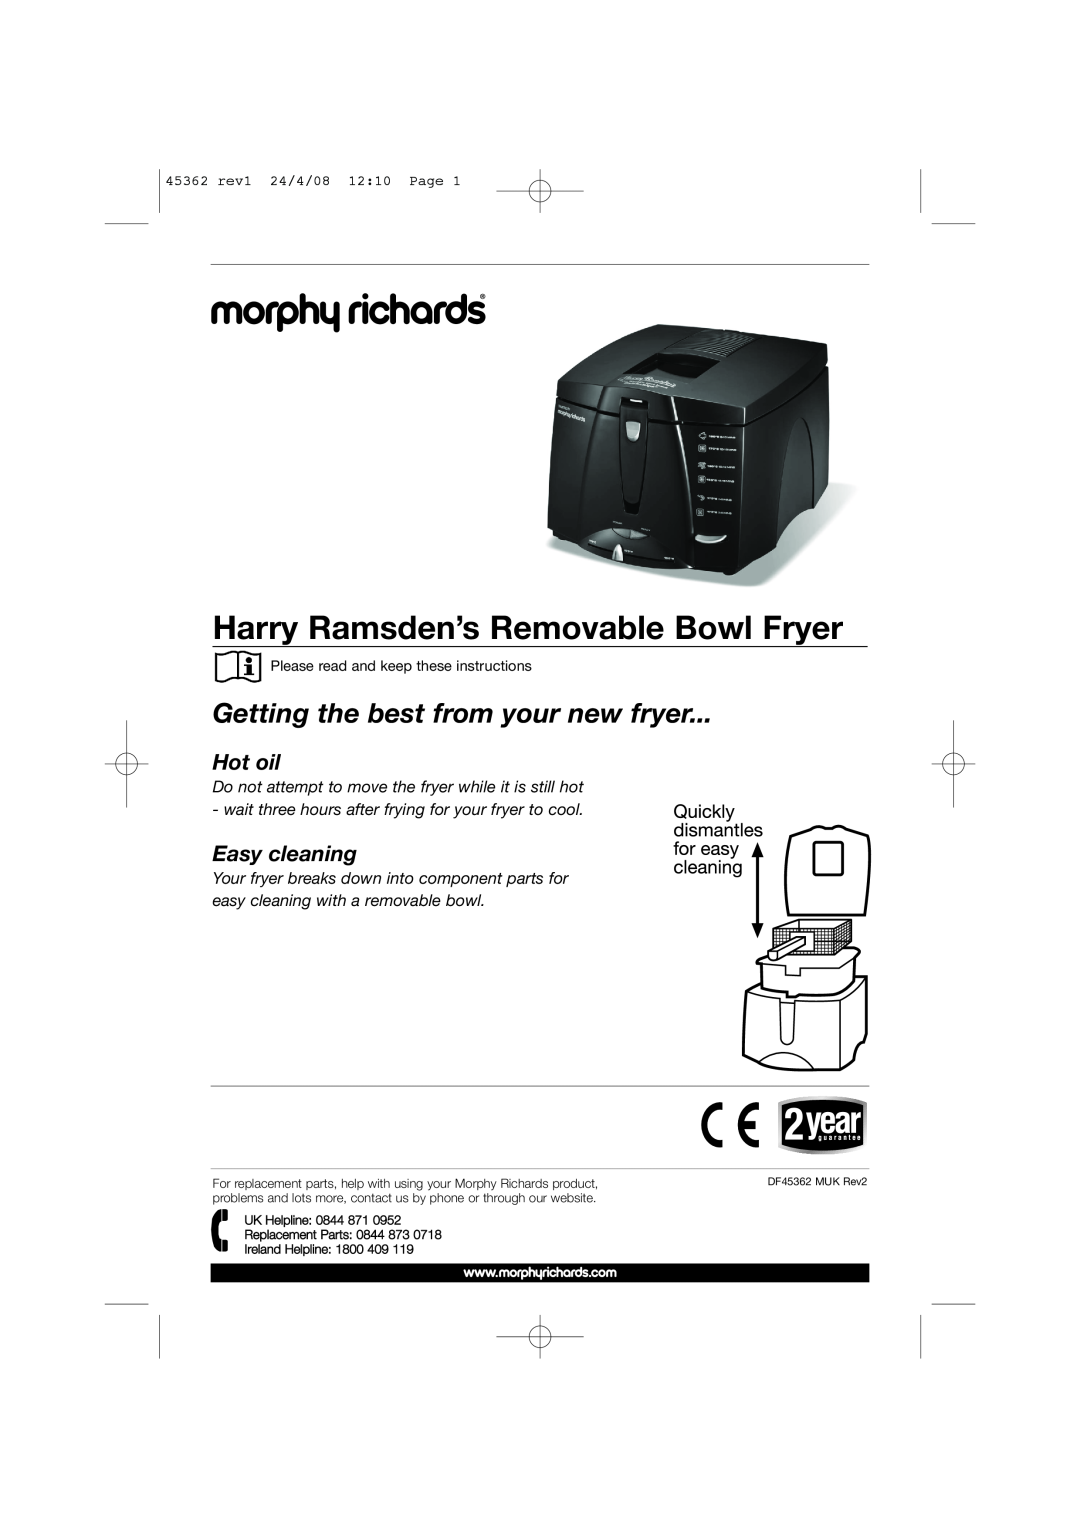 Morphy Richards 45362 manual Harry Ramsden’s Removable Bowl Fryer, Getting the best from your new fryer, Hot oil 